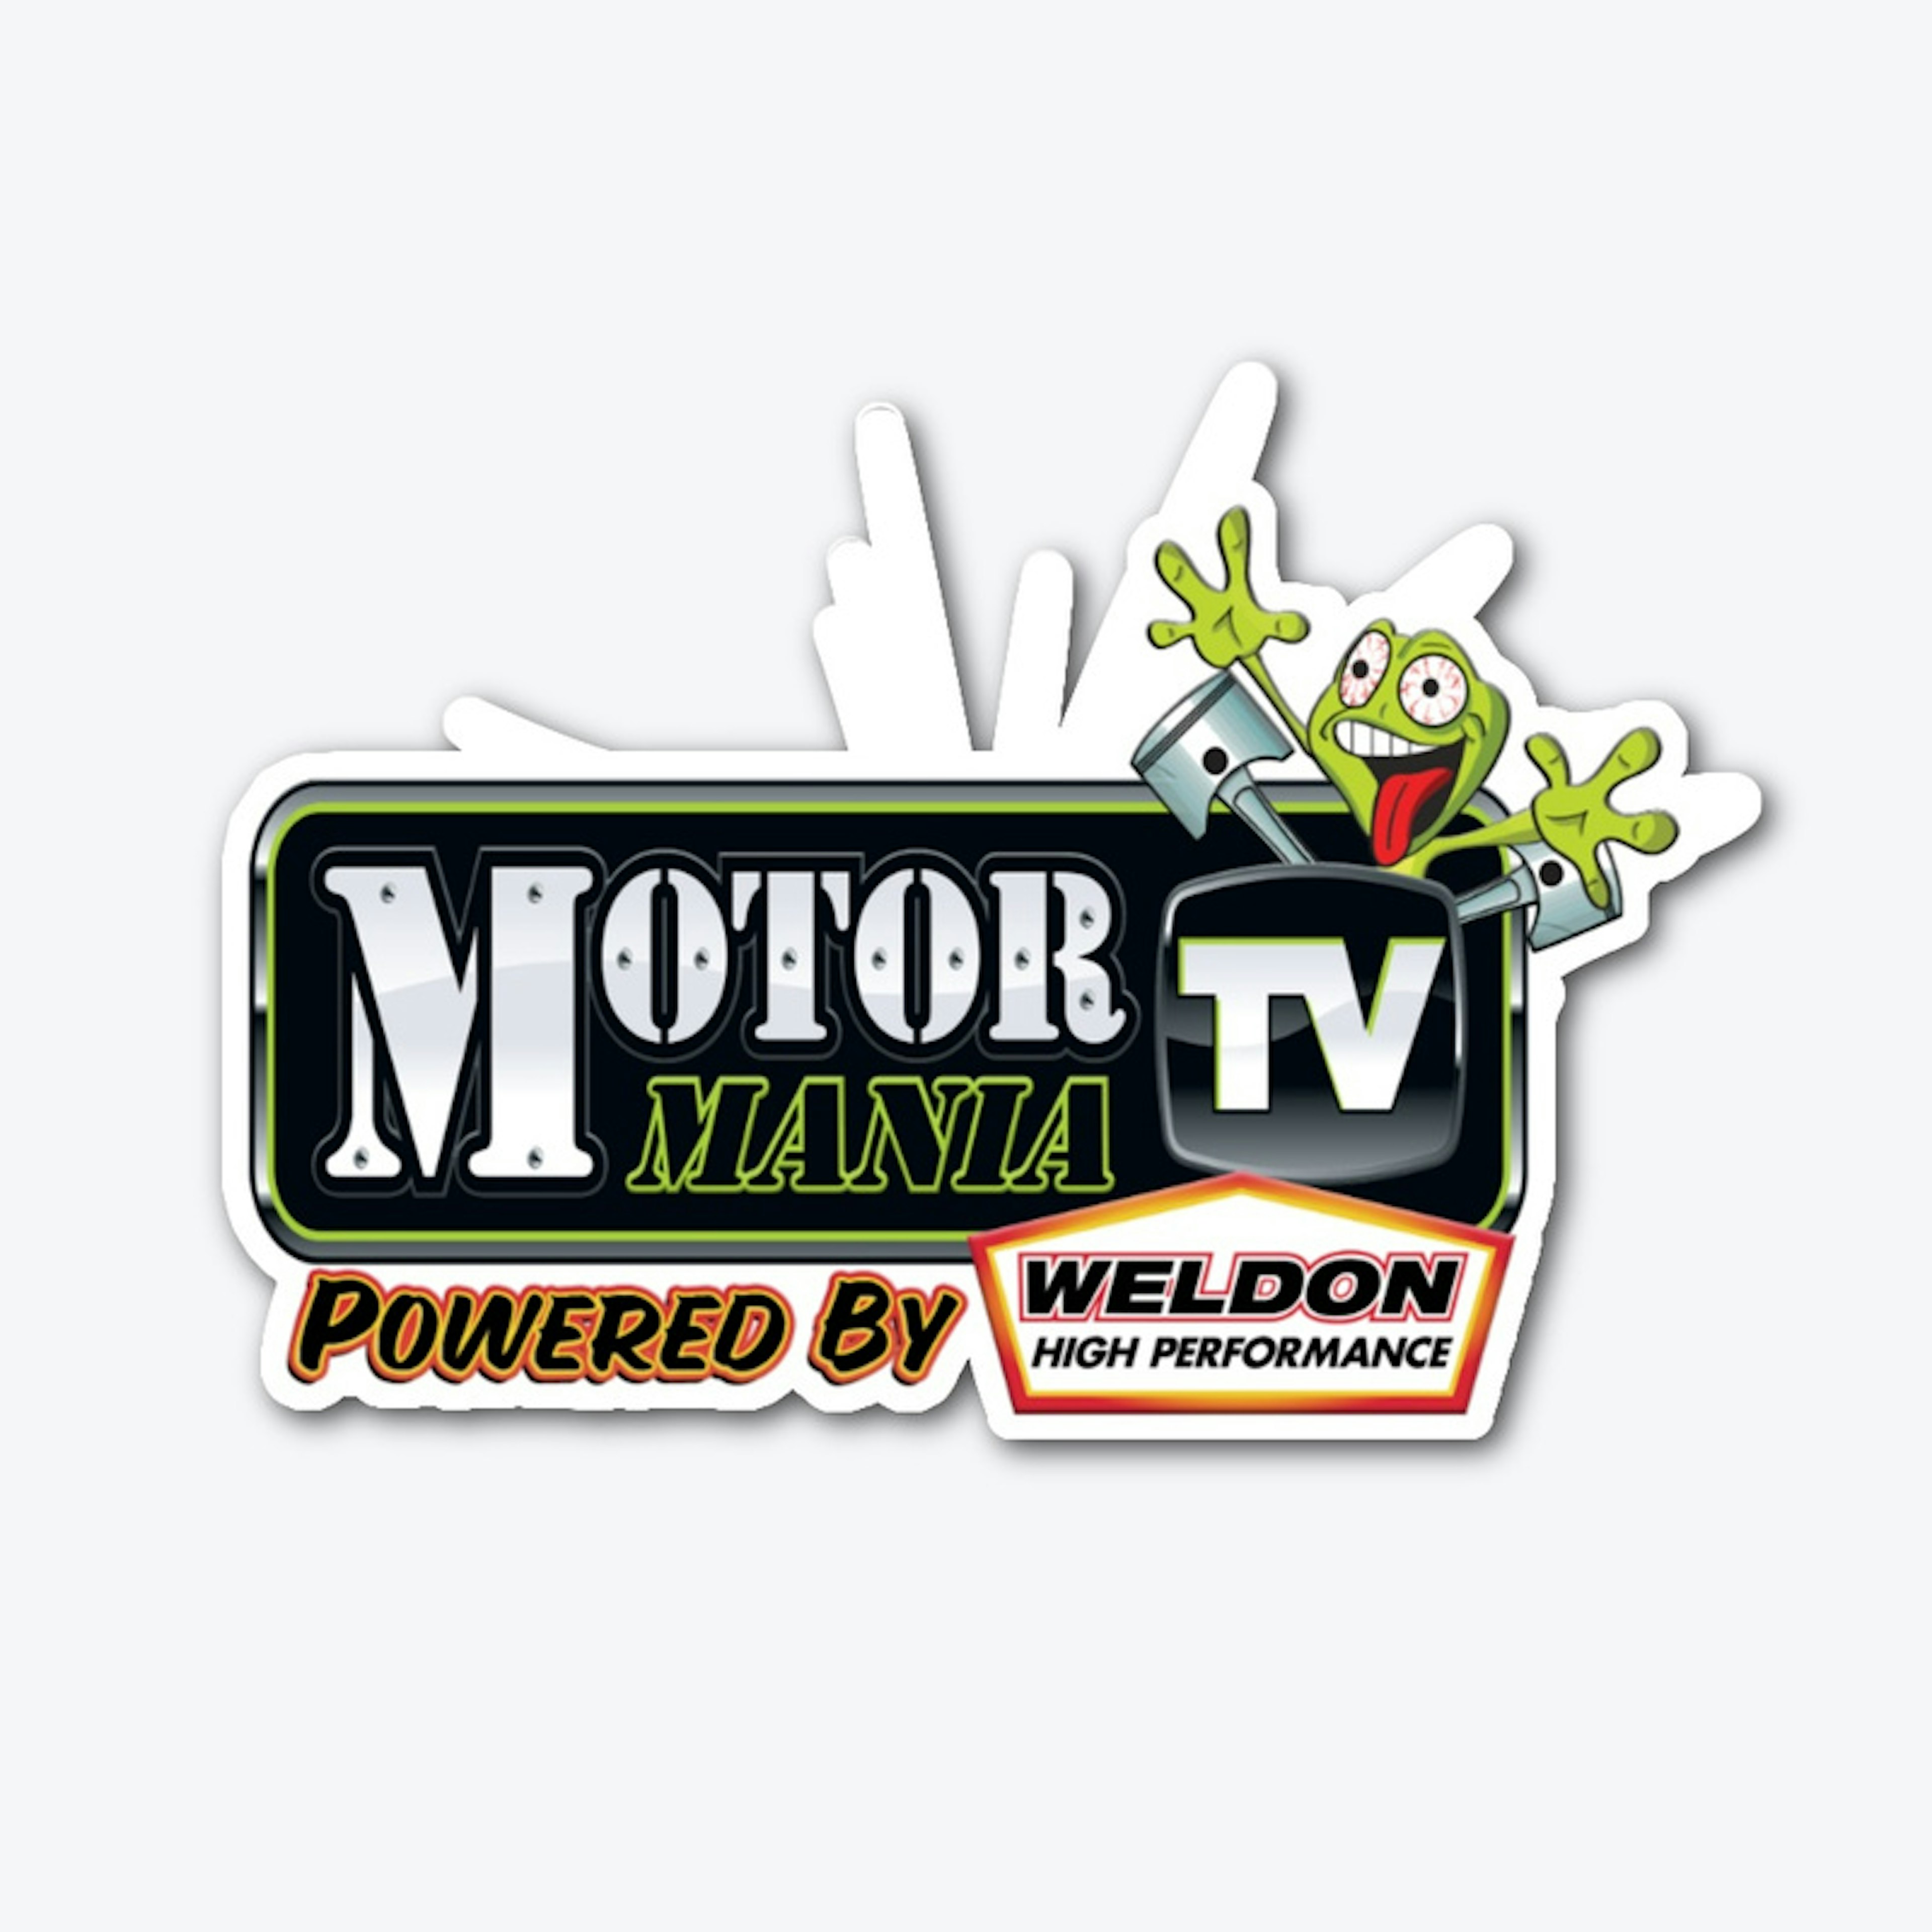 MMTV powered by WELDON